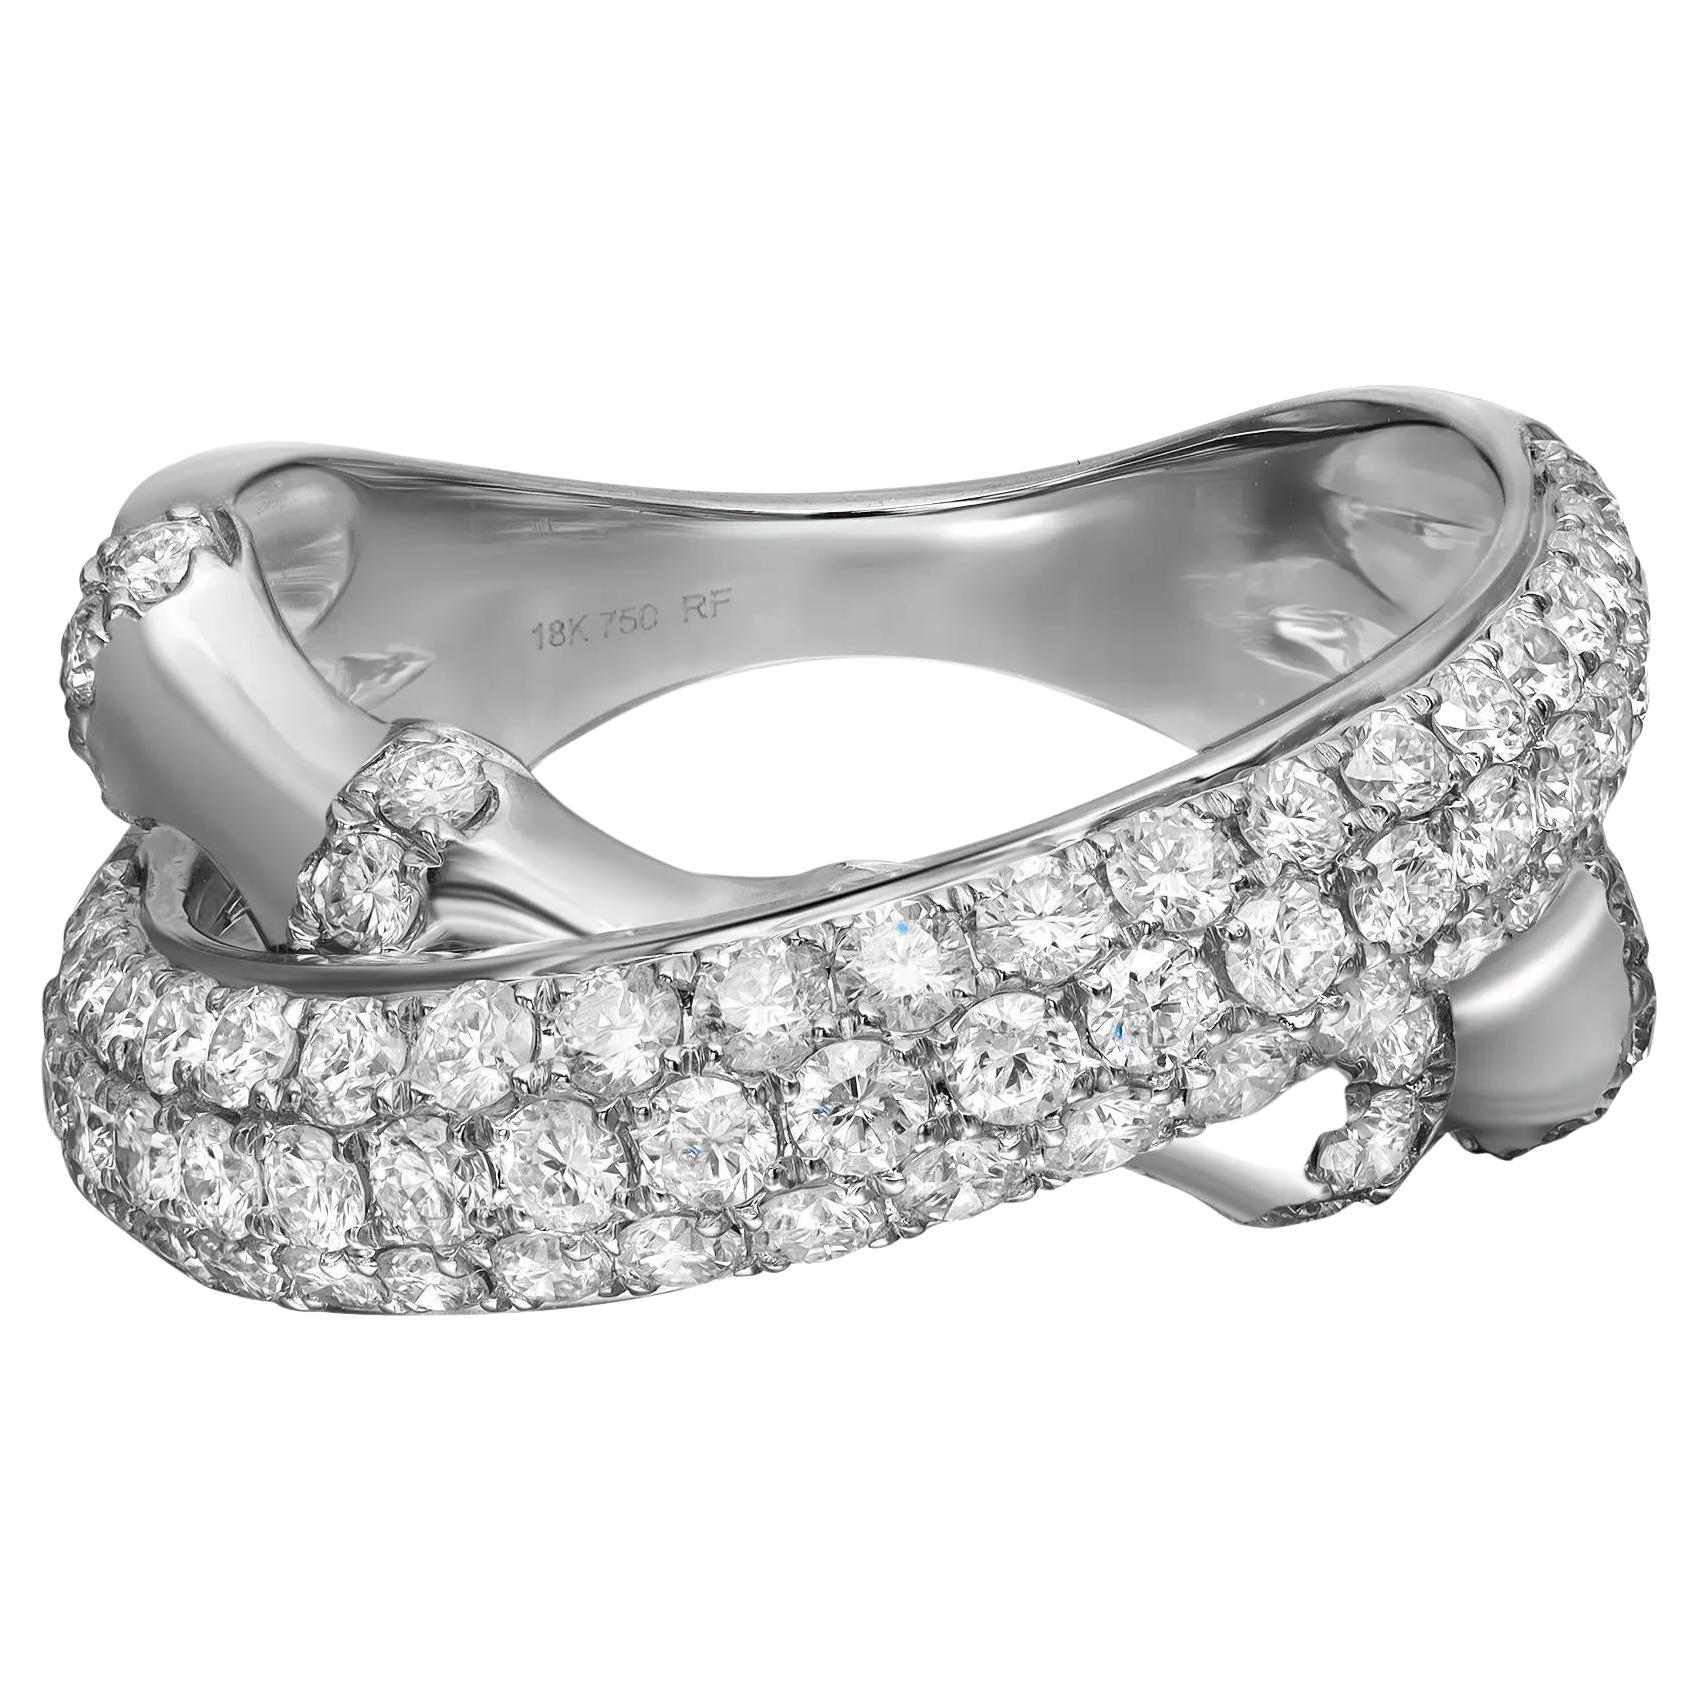 1.71Ctw Pave Set Round Cut Diamond Crossover Band Ring 18K White Gold Size 6.75  For Sale